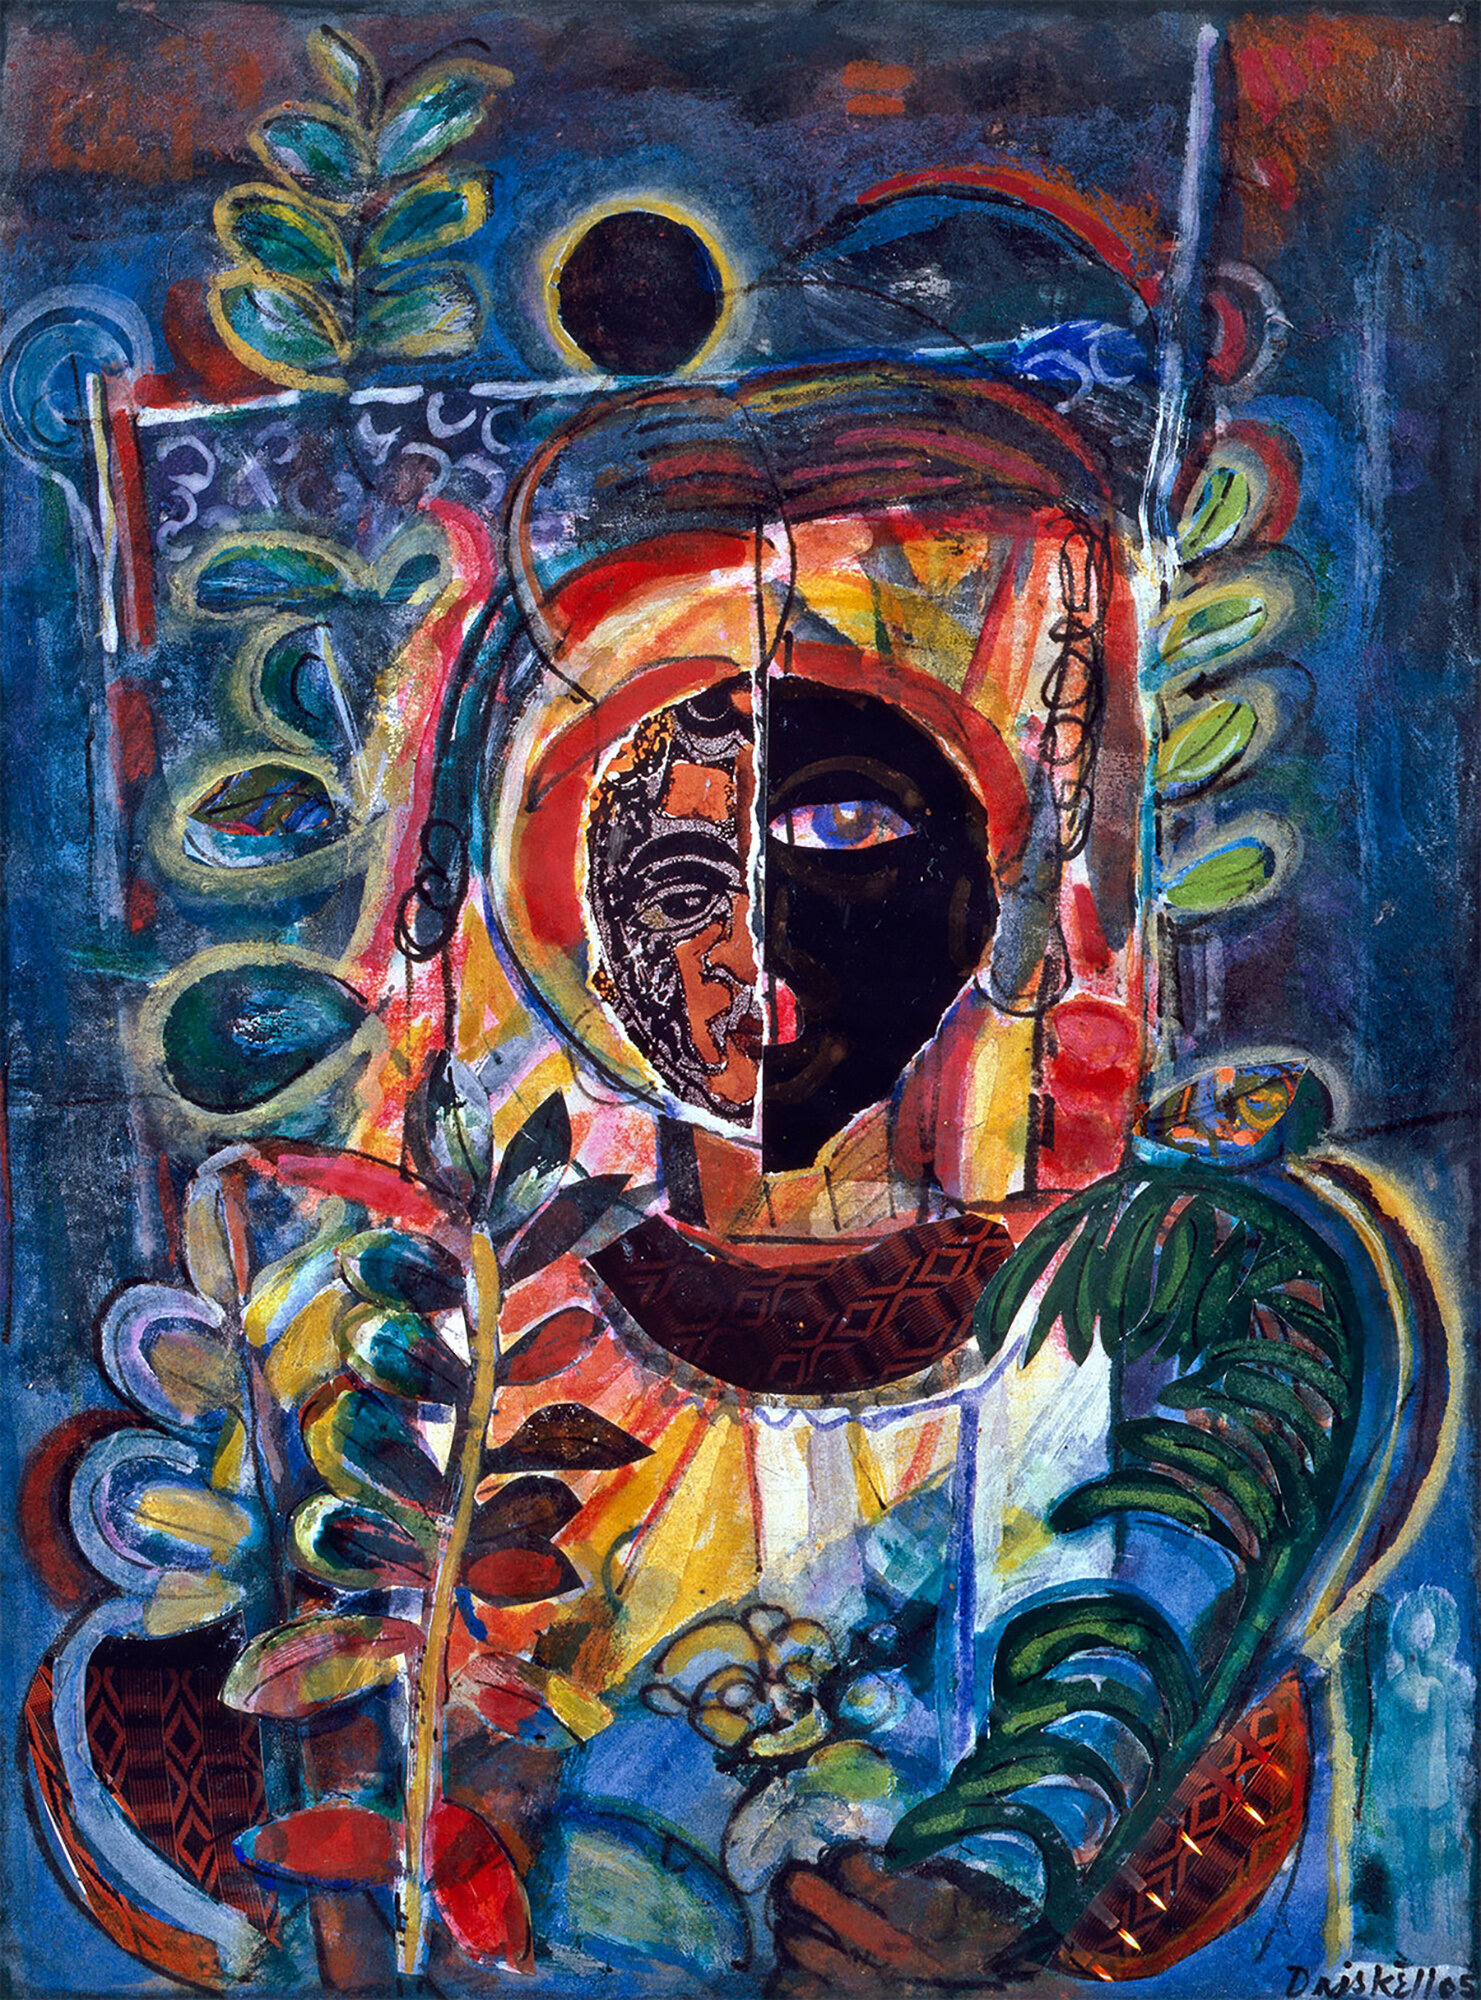  David C. Driskell (United States, 1931–2020),  Night Vision (for Jacob Lawrence) , 2005, collage and gouache on paper, 16 1/2 x 22 inches. Collection of Richard and Barbara Schiffrin, Wynnewood, Pennsylvania. Photograph by Sandra Paci. © Estate of D